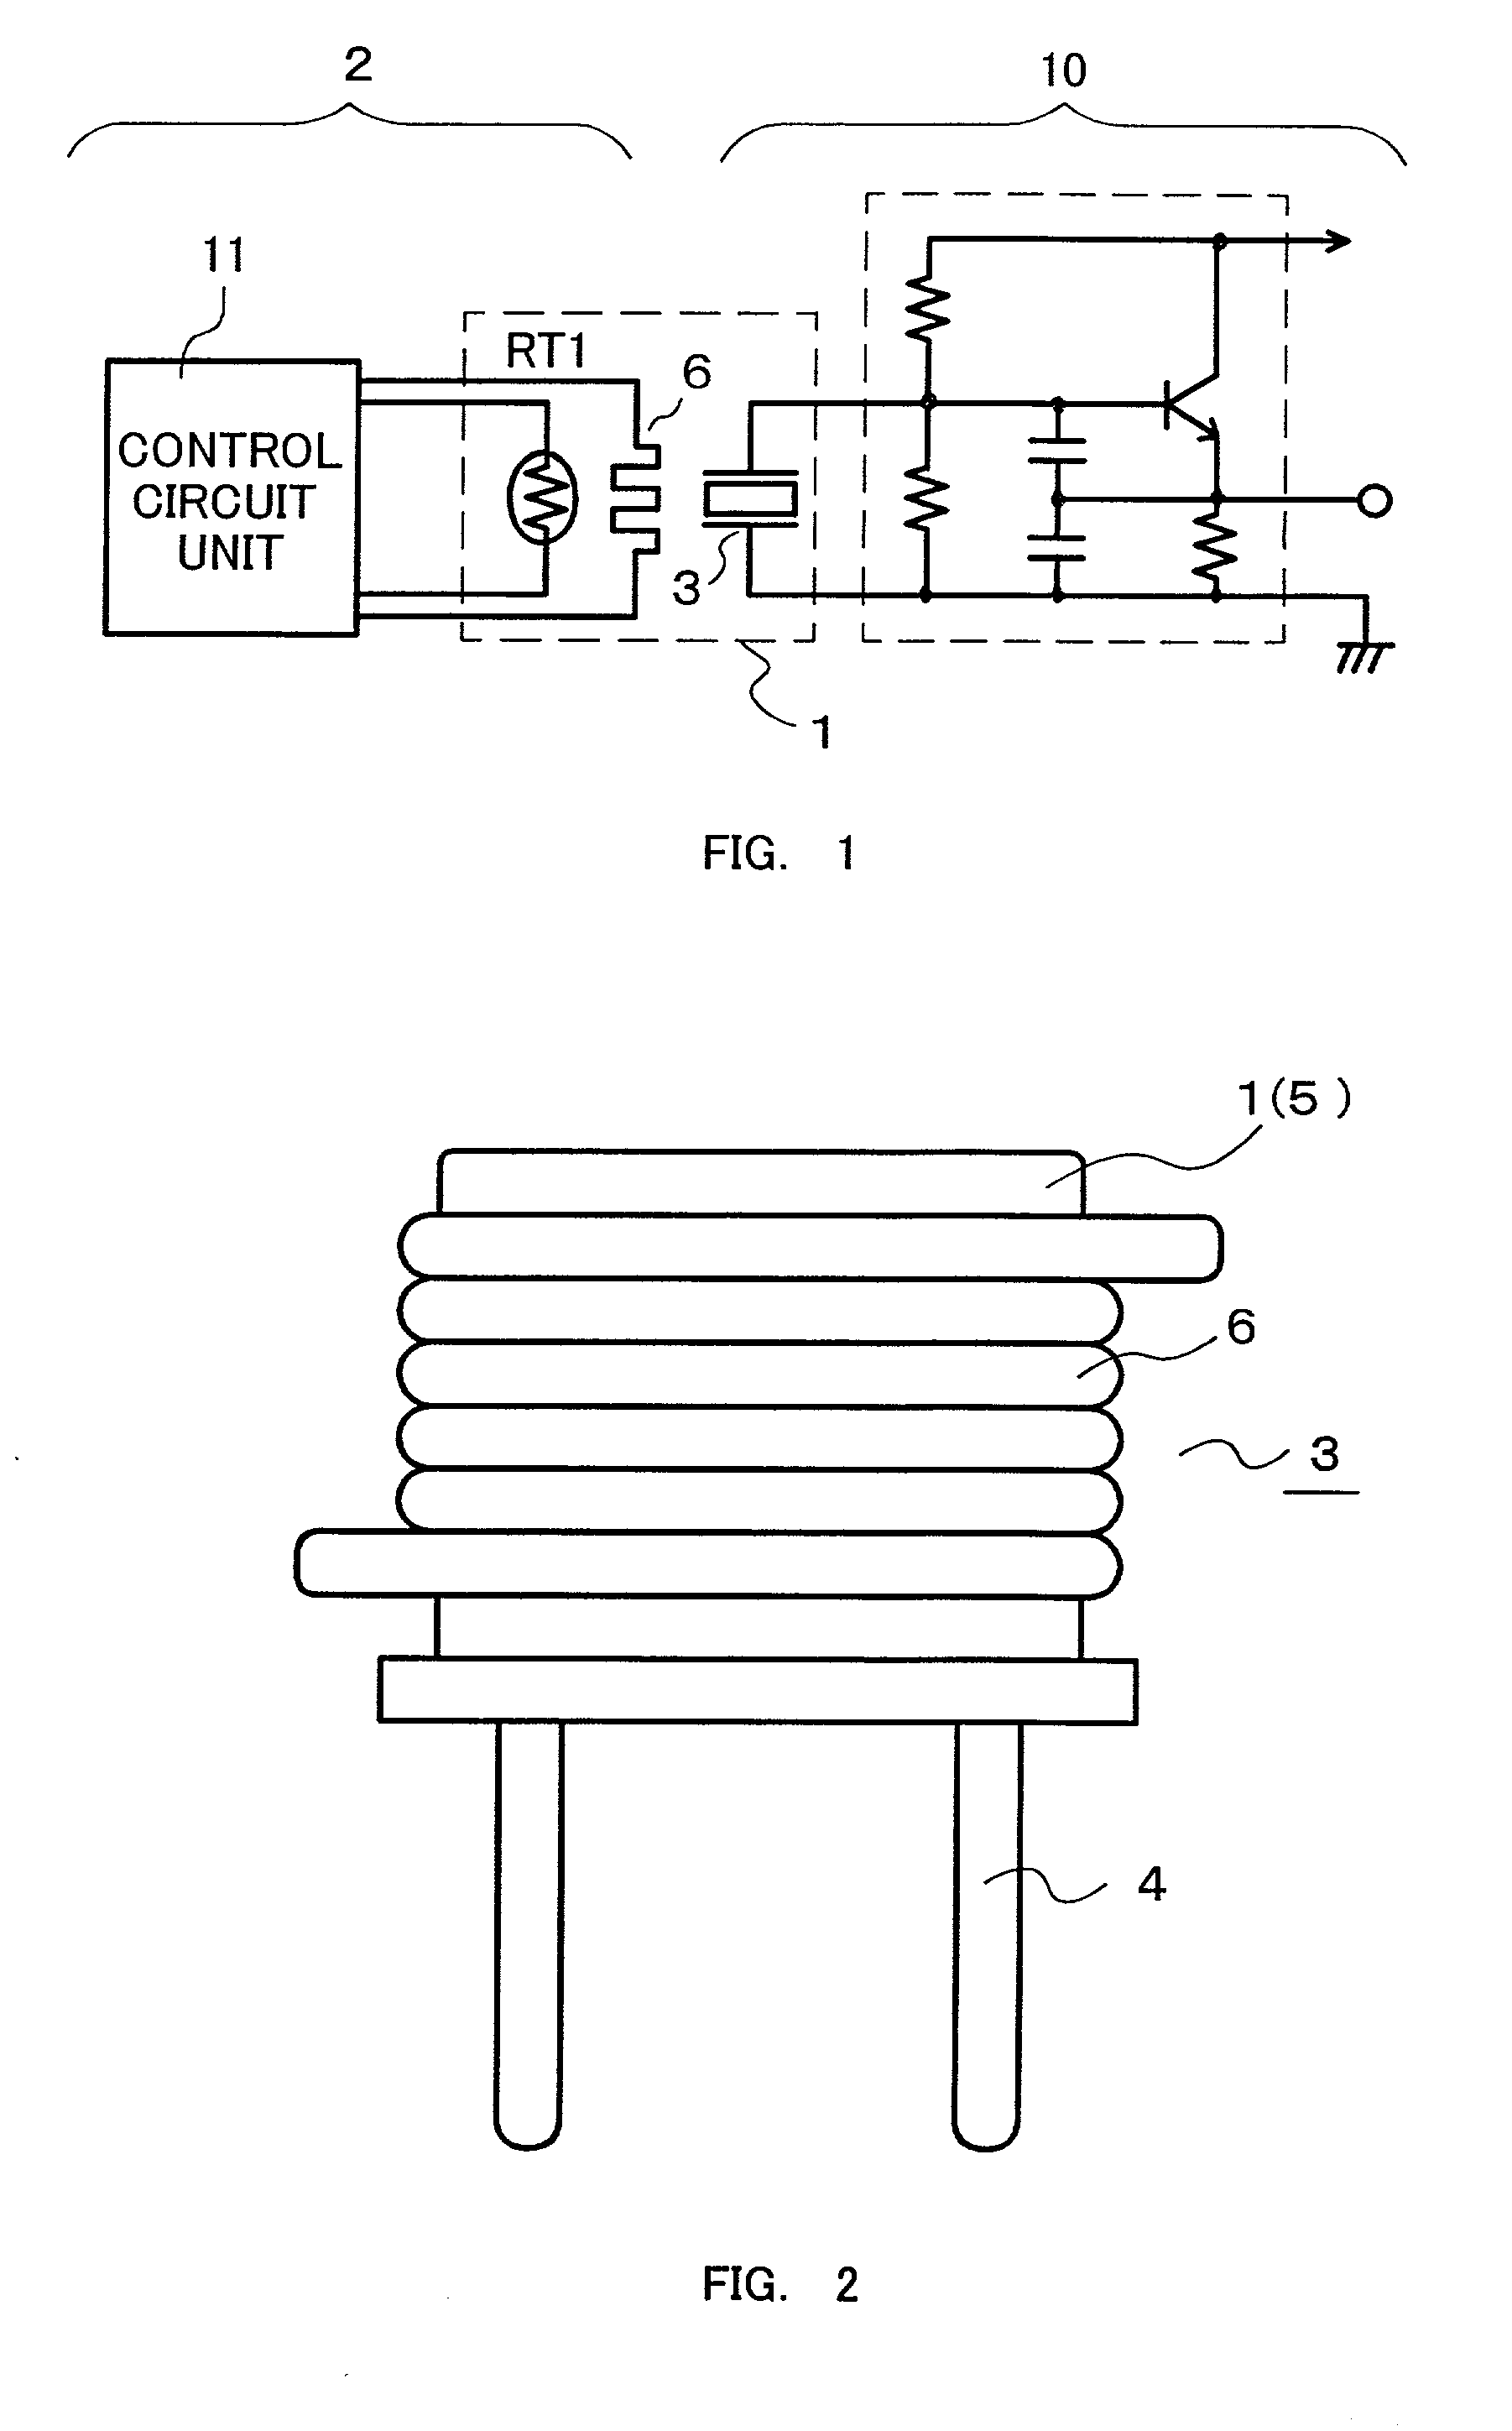 Oscillator that uses thermostatic oven